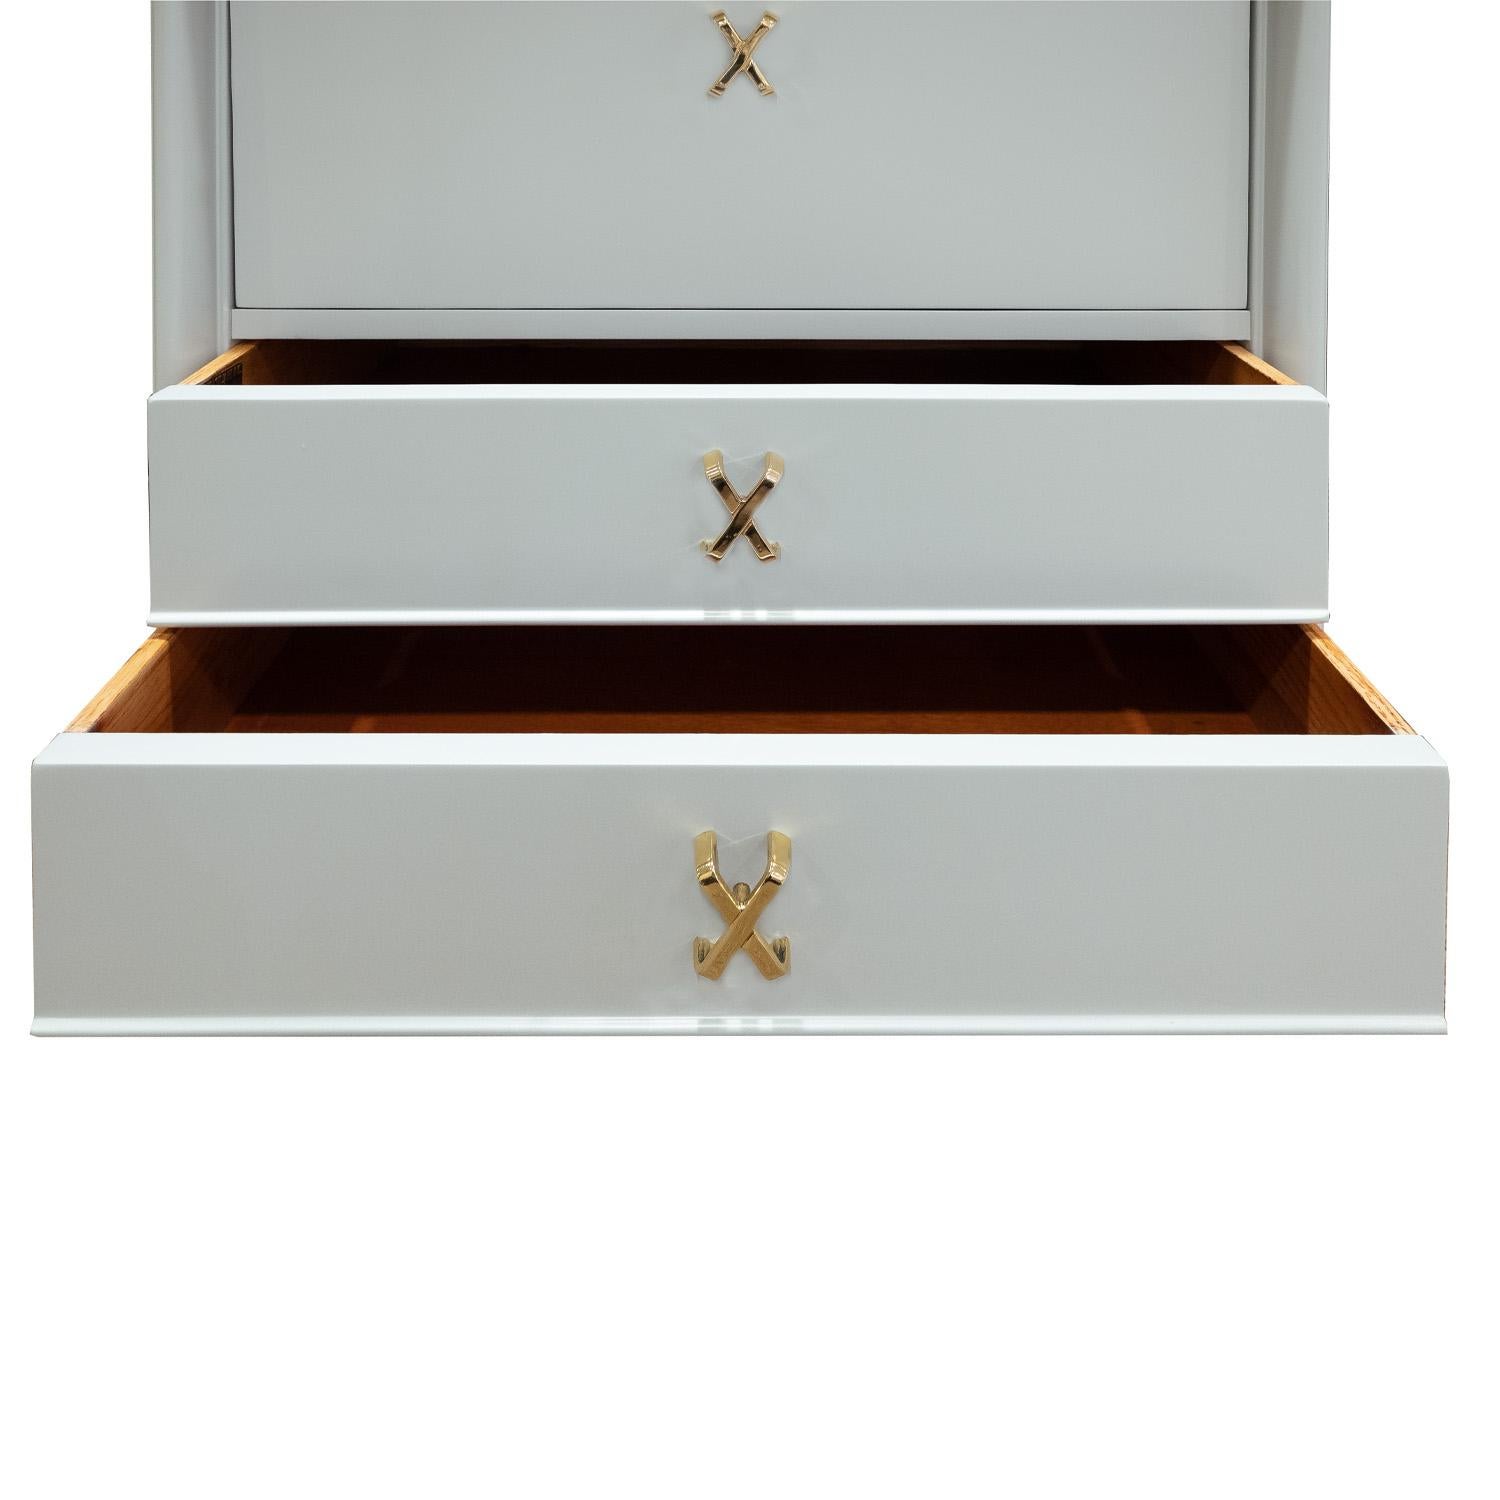 Mid-20th Century Paul Frankl Pair of Lacquered Bedside Tables with Brass Pulls 1950s, 'Signed'